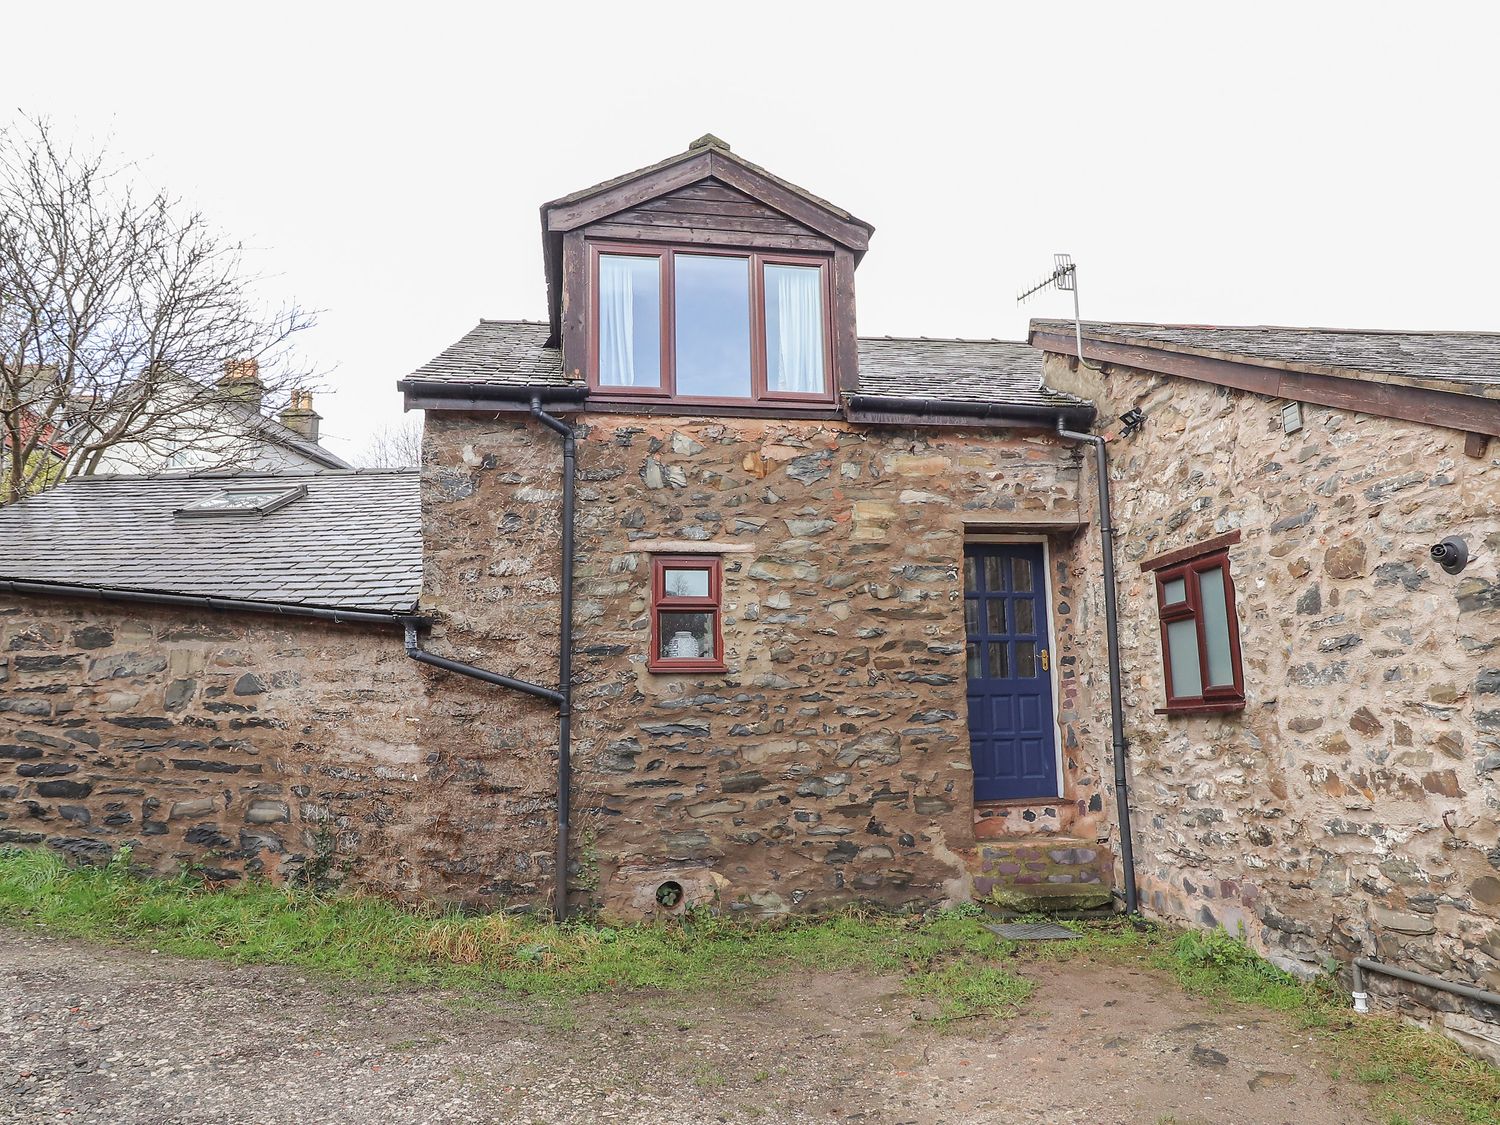 Dovetail Cottage - North Wales - 912854 - photo 1